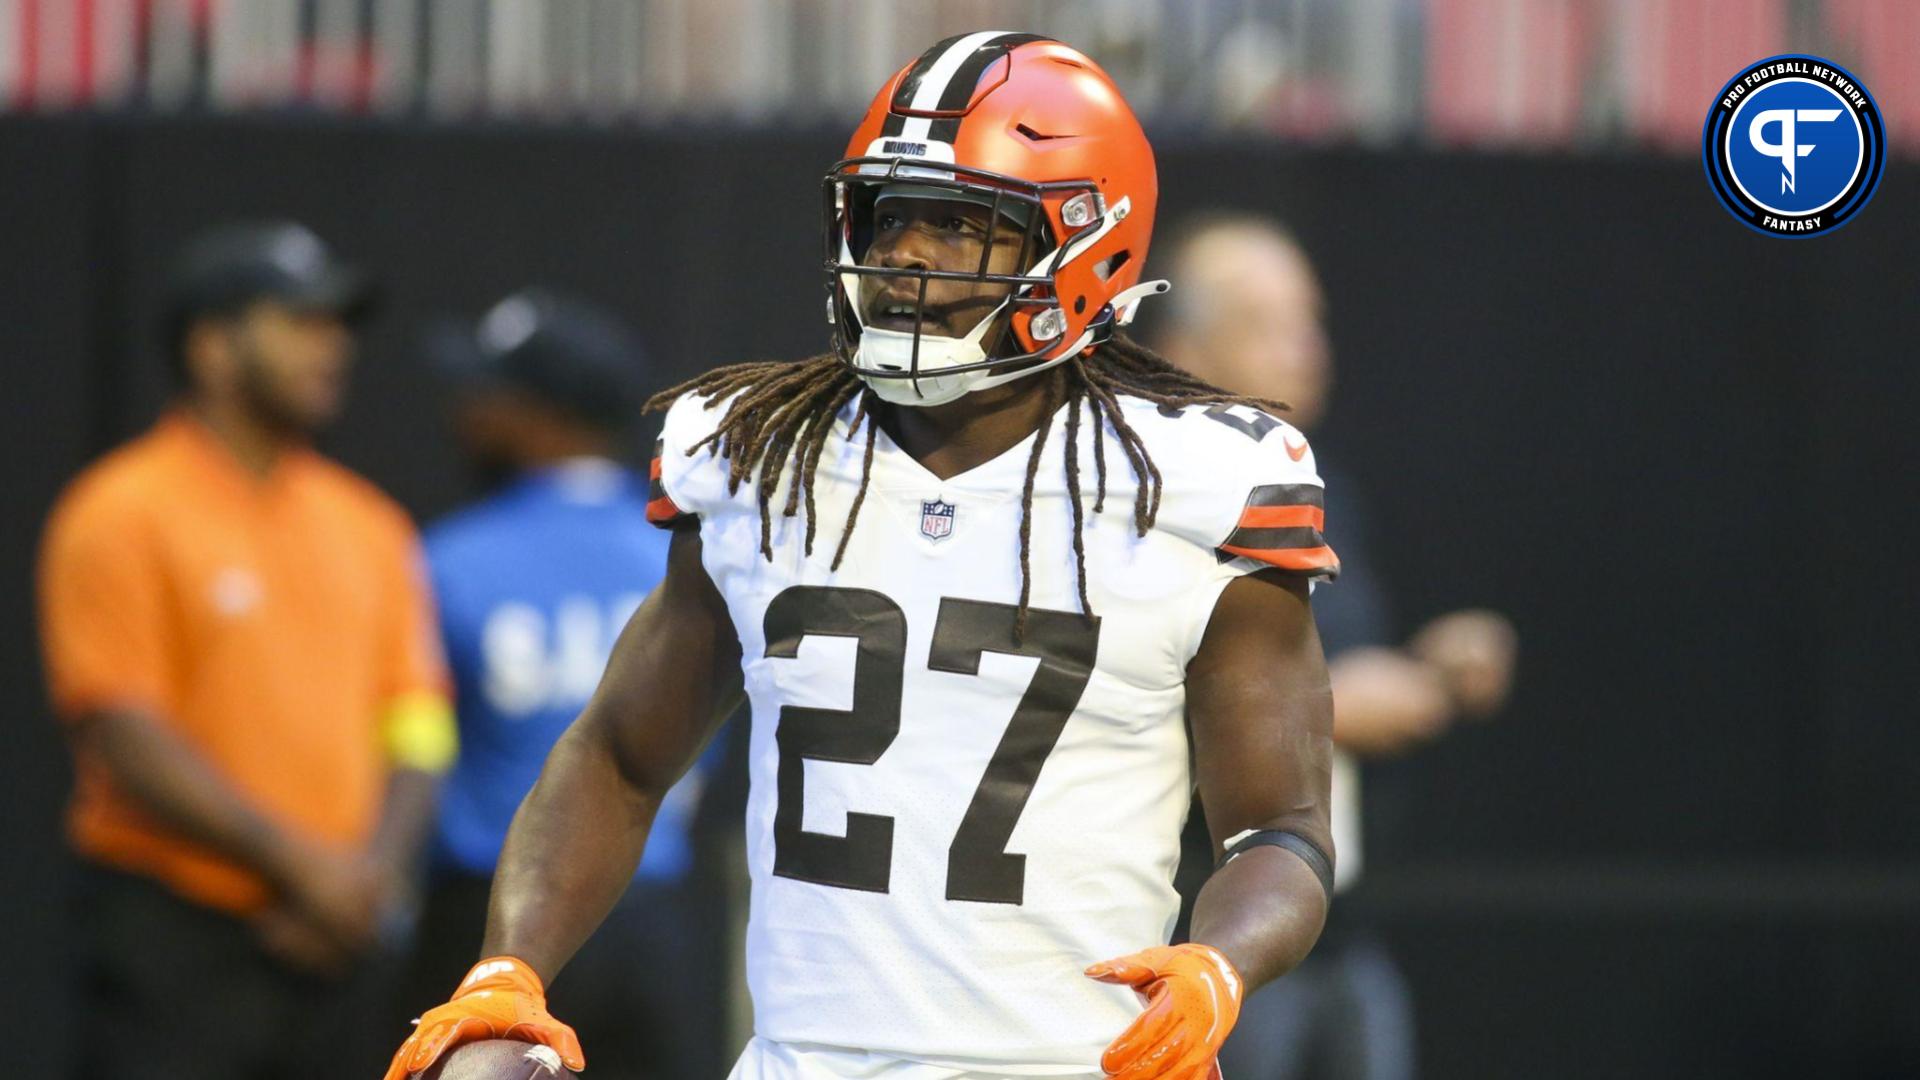 Report: Kareem Hunt won't return to Cleveland, Browns think he has